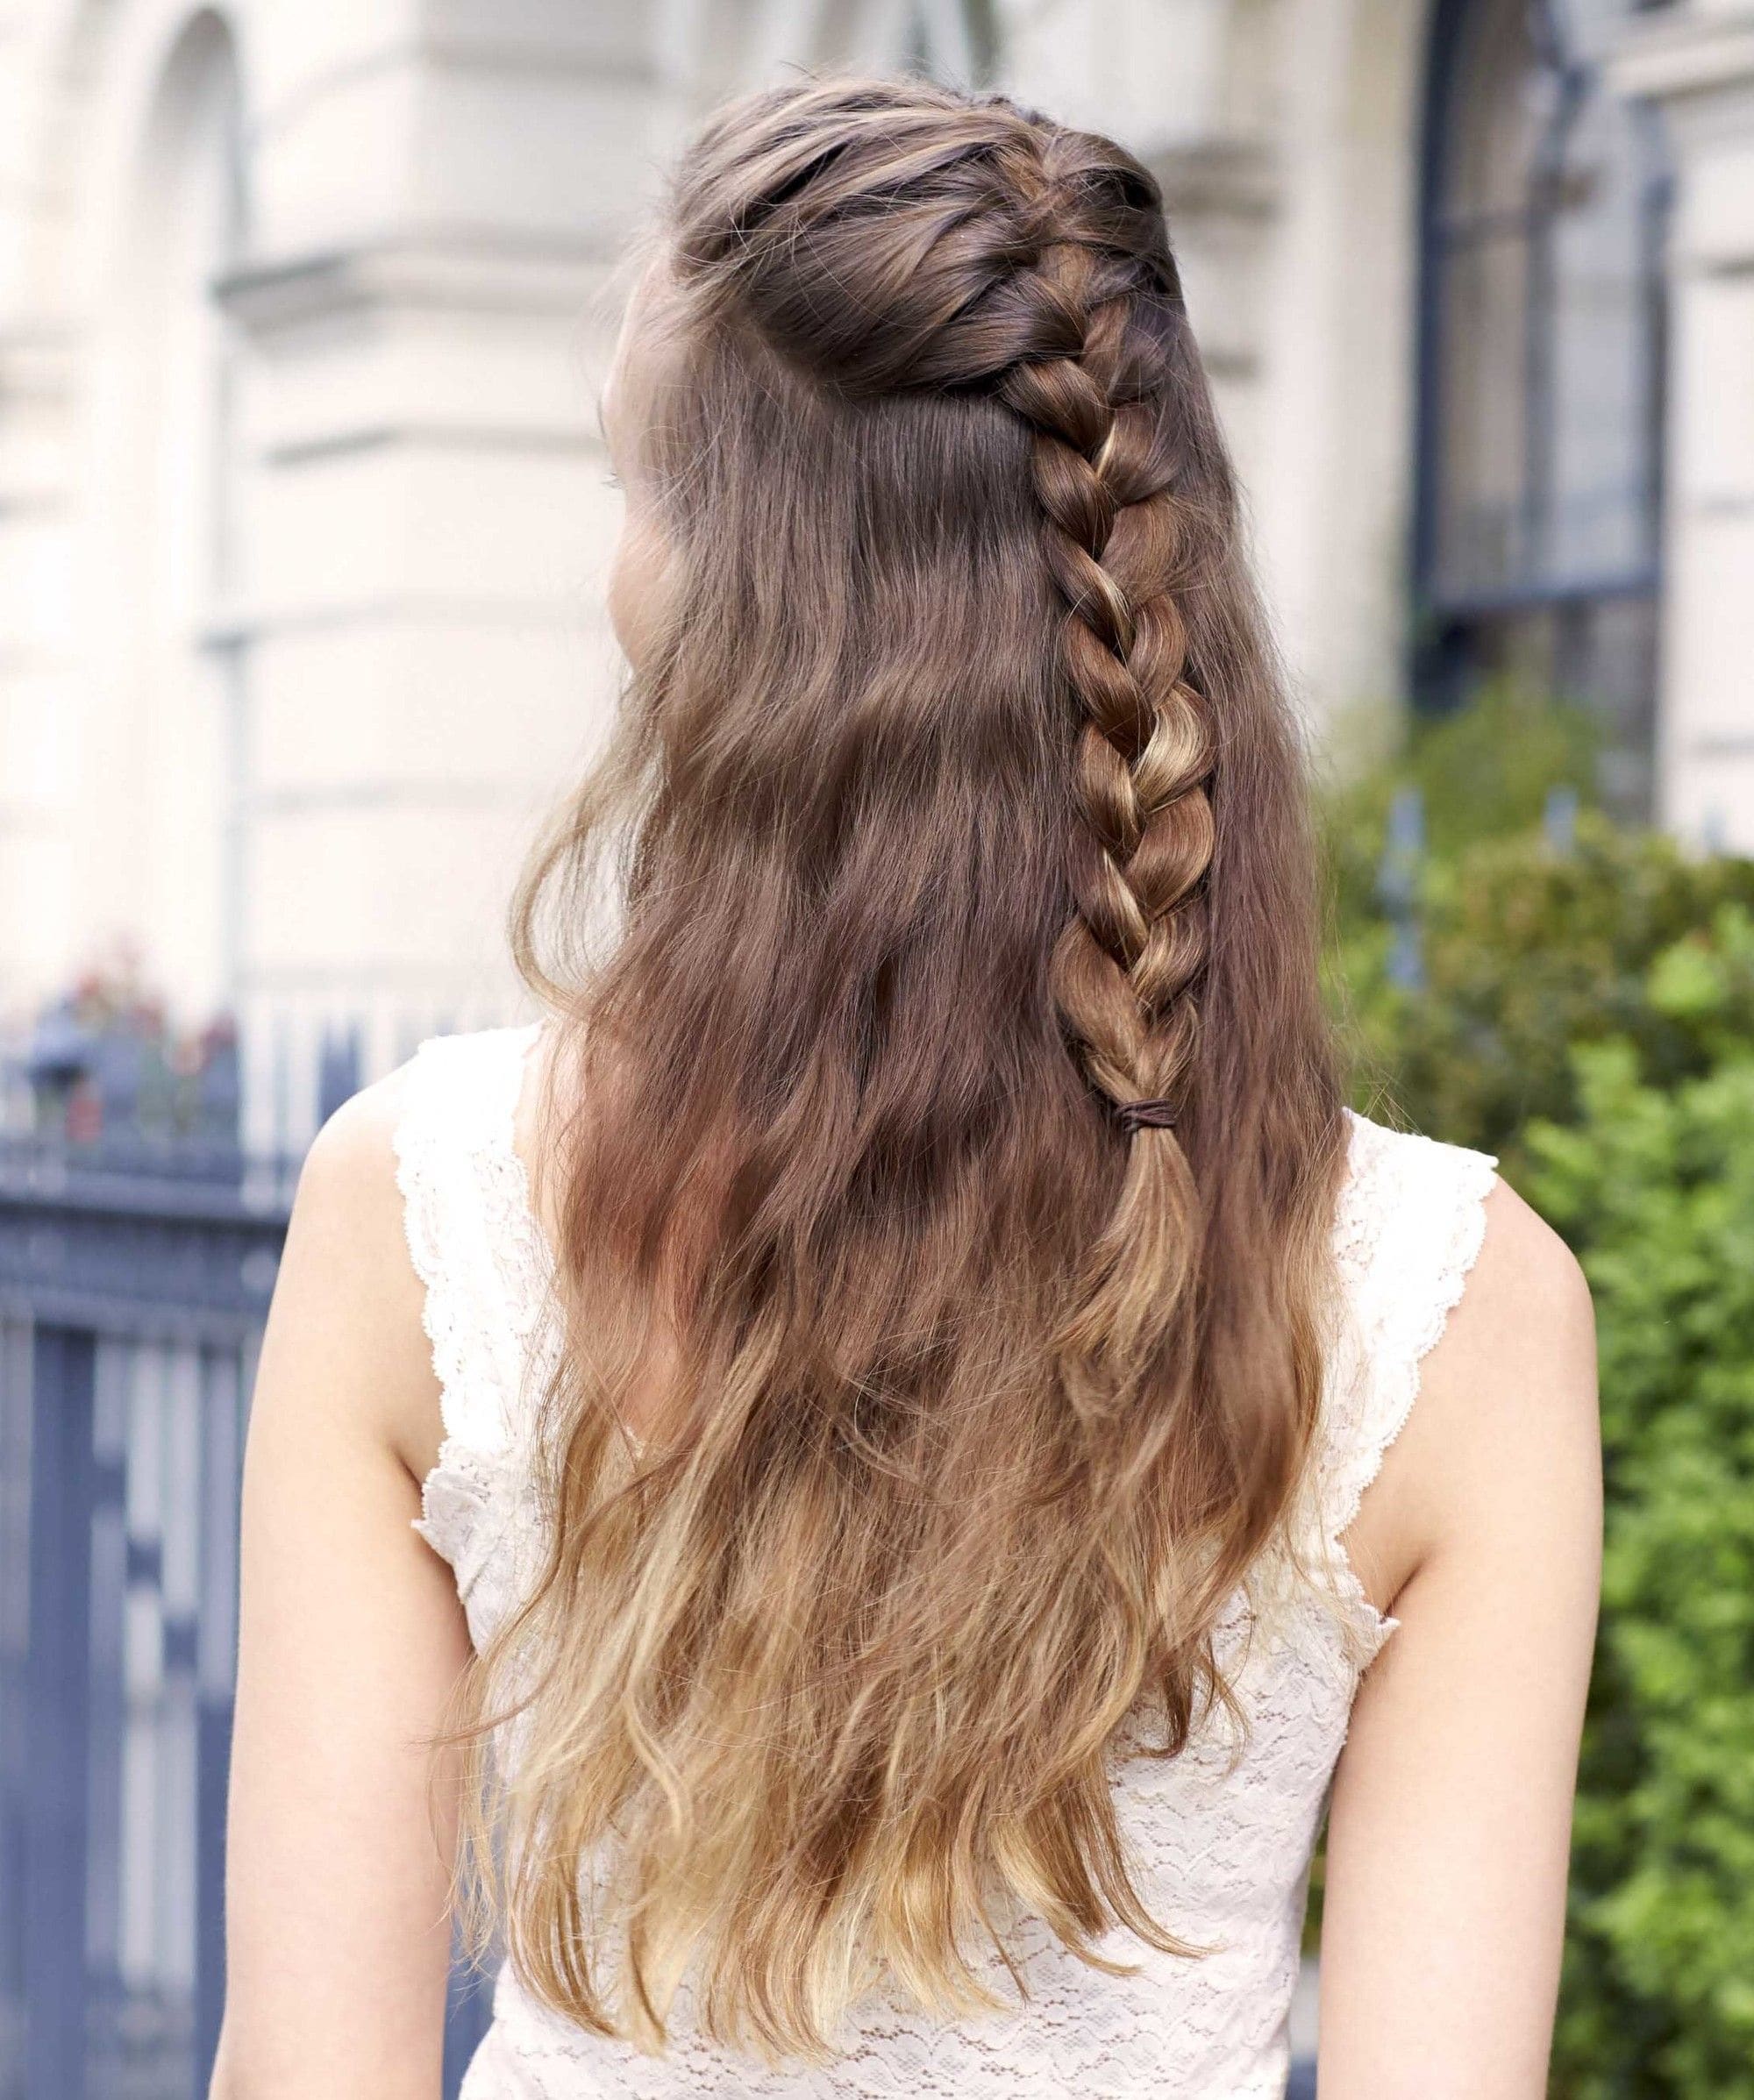 9 Easy and Simple Braided Hairstyles for Long Hair  Styles At Life